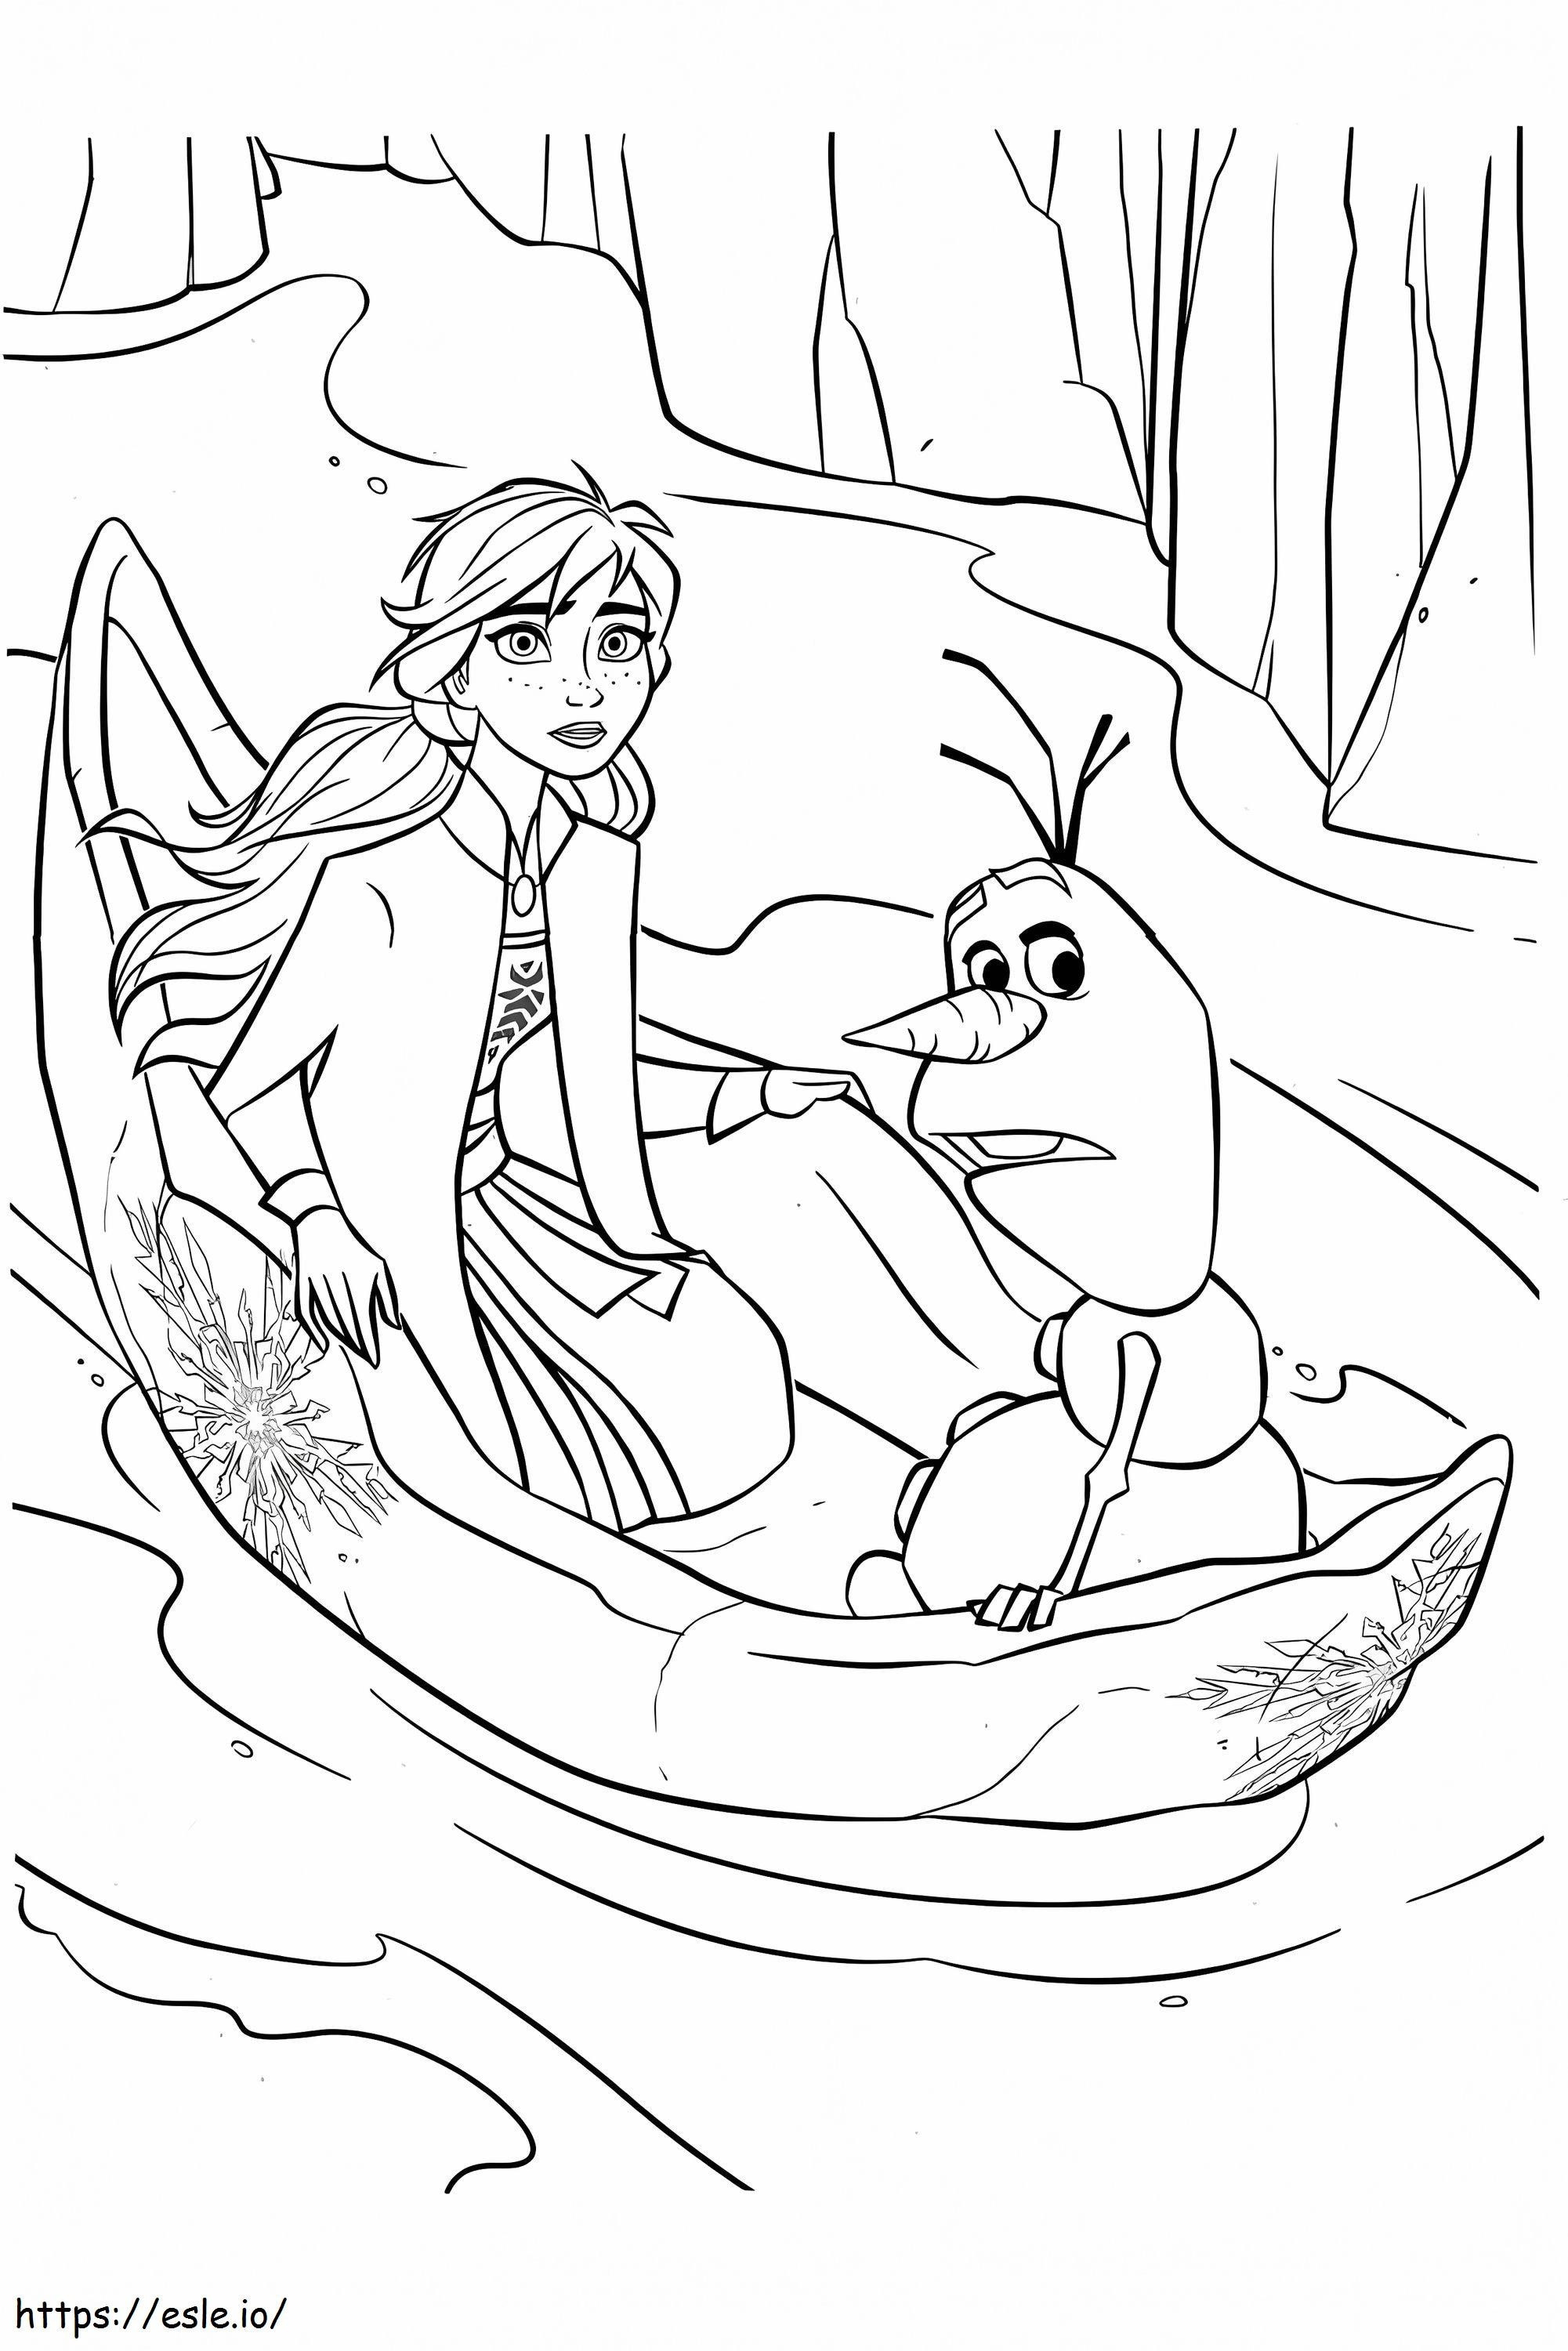 Frozen 2 Anna And Olaf 683X1024 coloring page